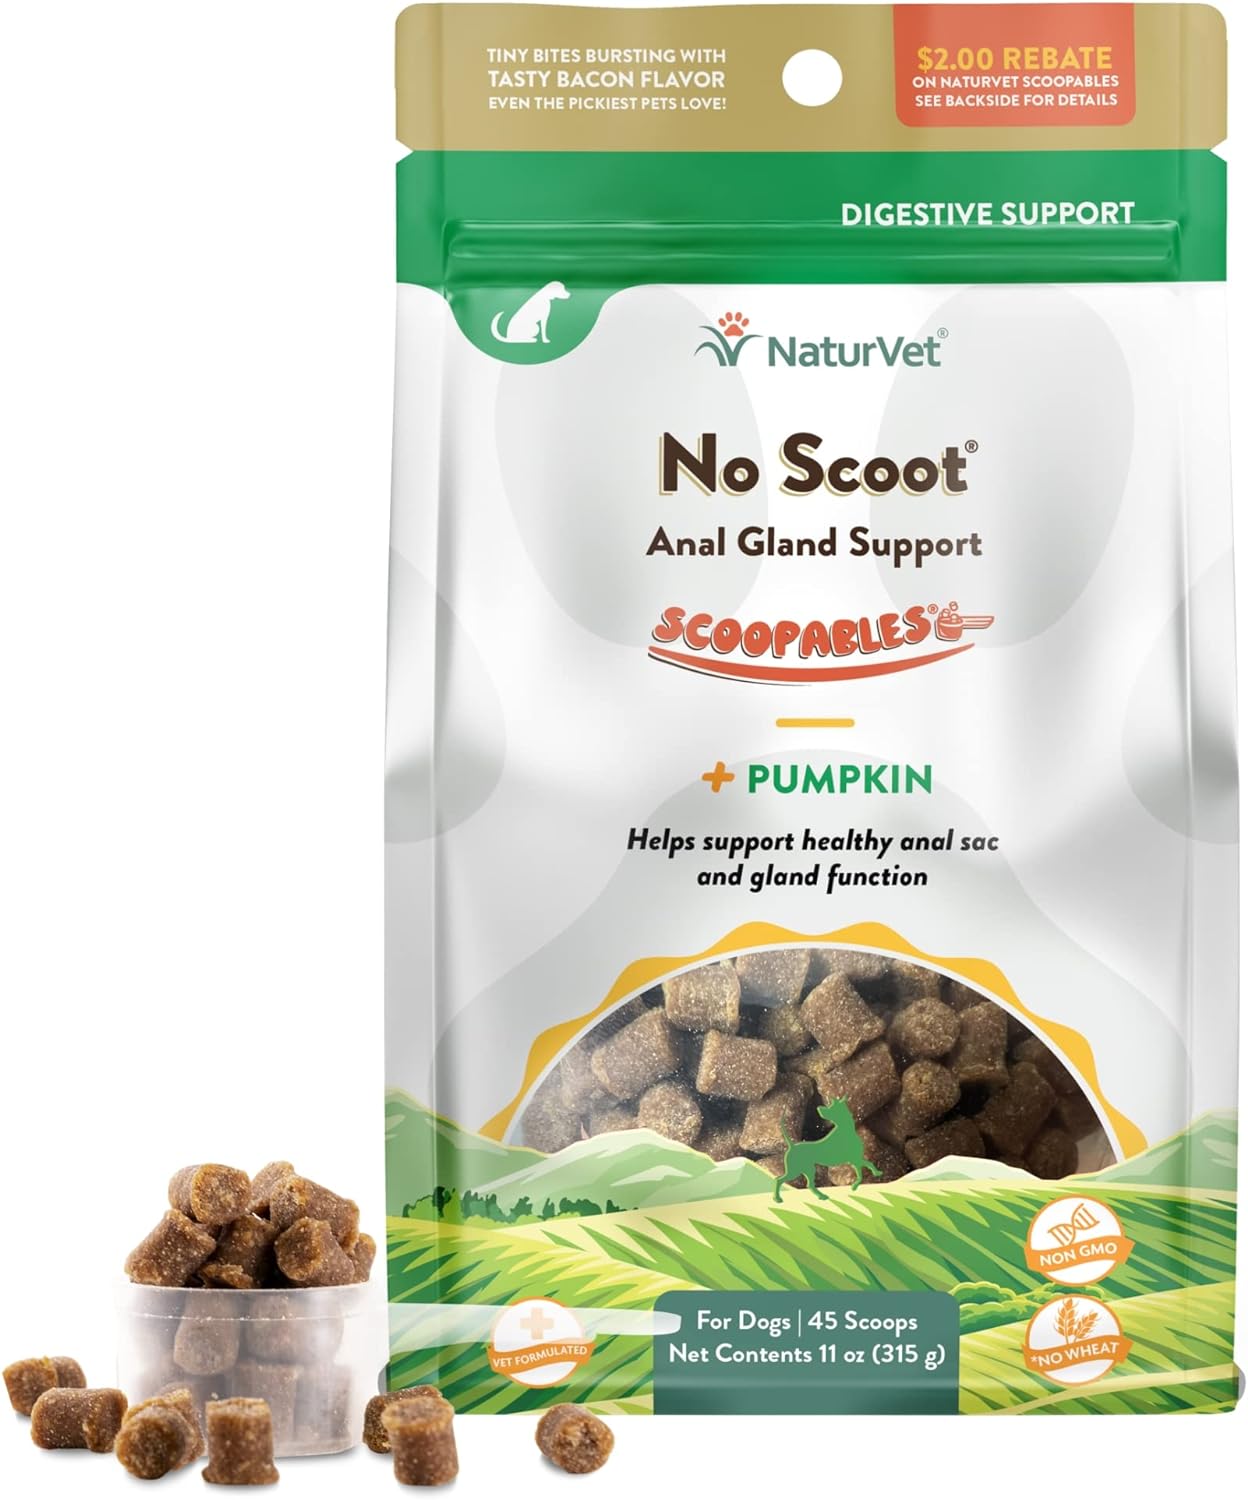 NaturVet Scoopables No Scoot For Dog Bite - Anal Gland Support For Dogs - Supports Normal Bowel Function - Chewable Stool & Bowel Health Pet Supplement - Pumpkin, Psyllium Husk, & Beet Pulp | 11oz Bag